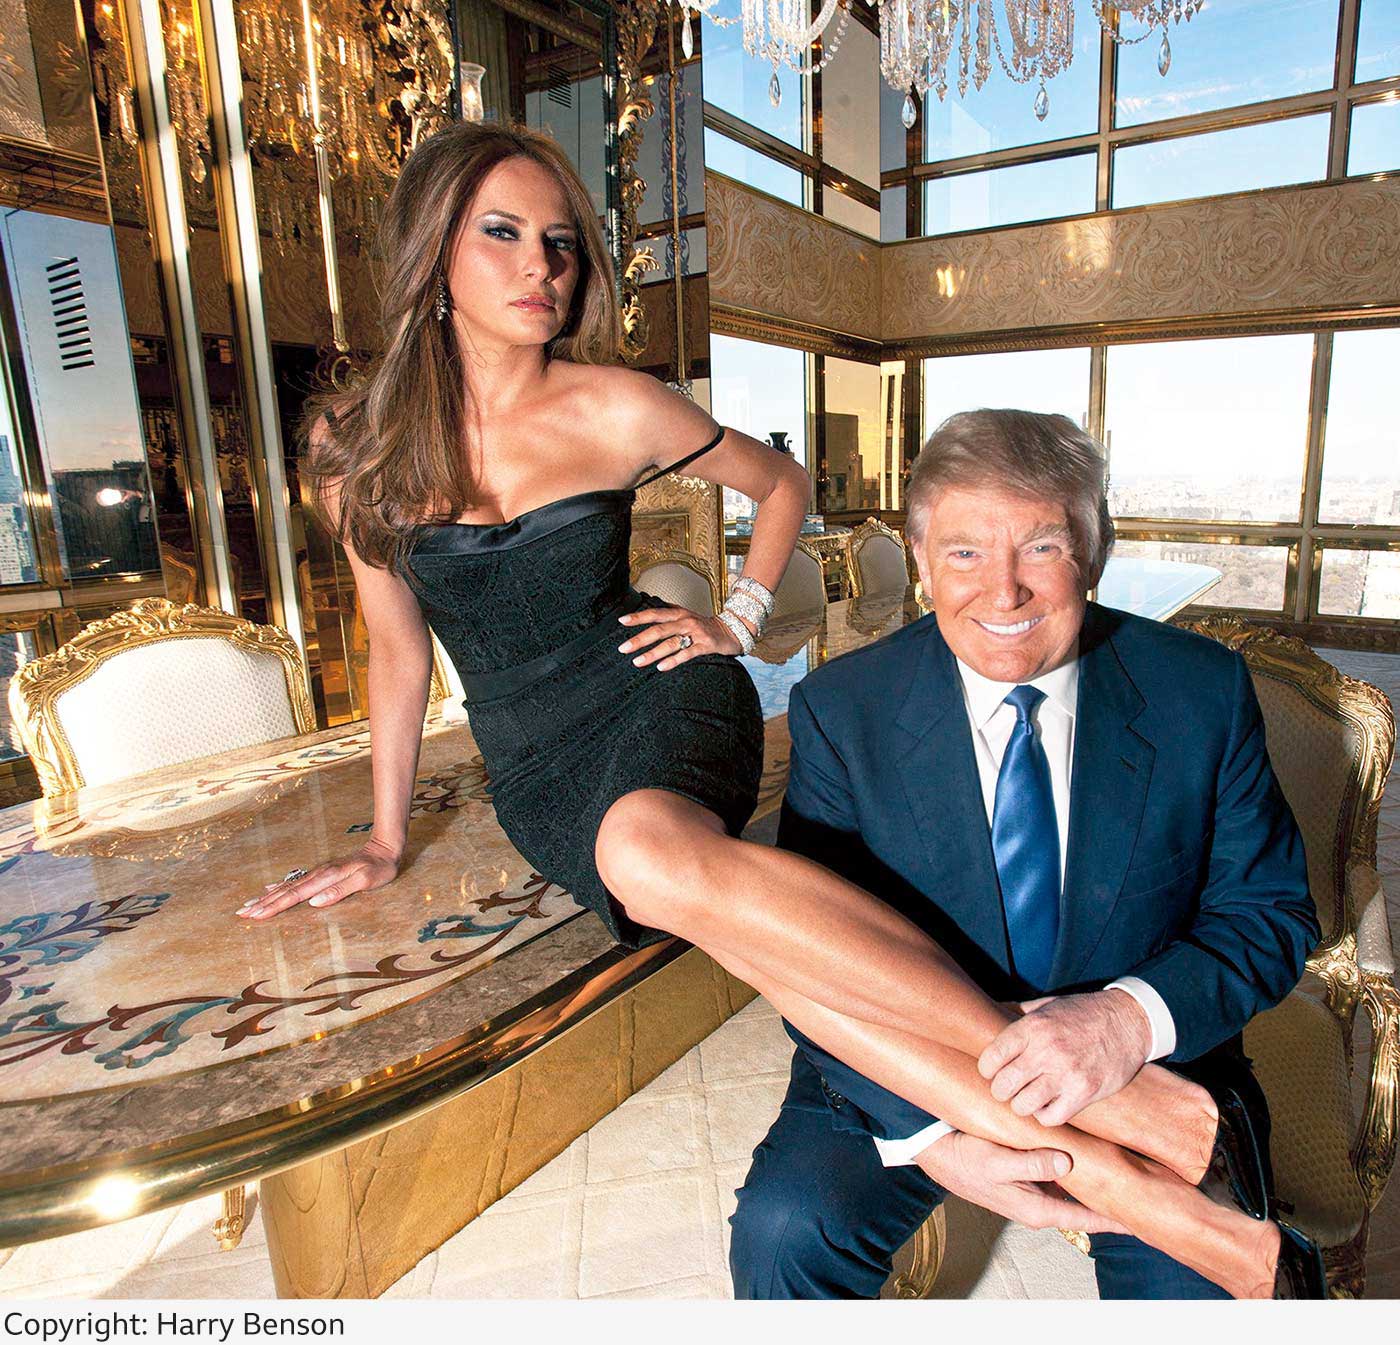 Donald Trump with his wife Melania in their Trump Tower apartment in 2014